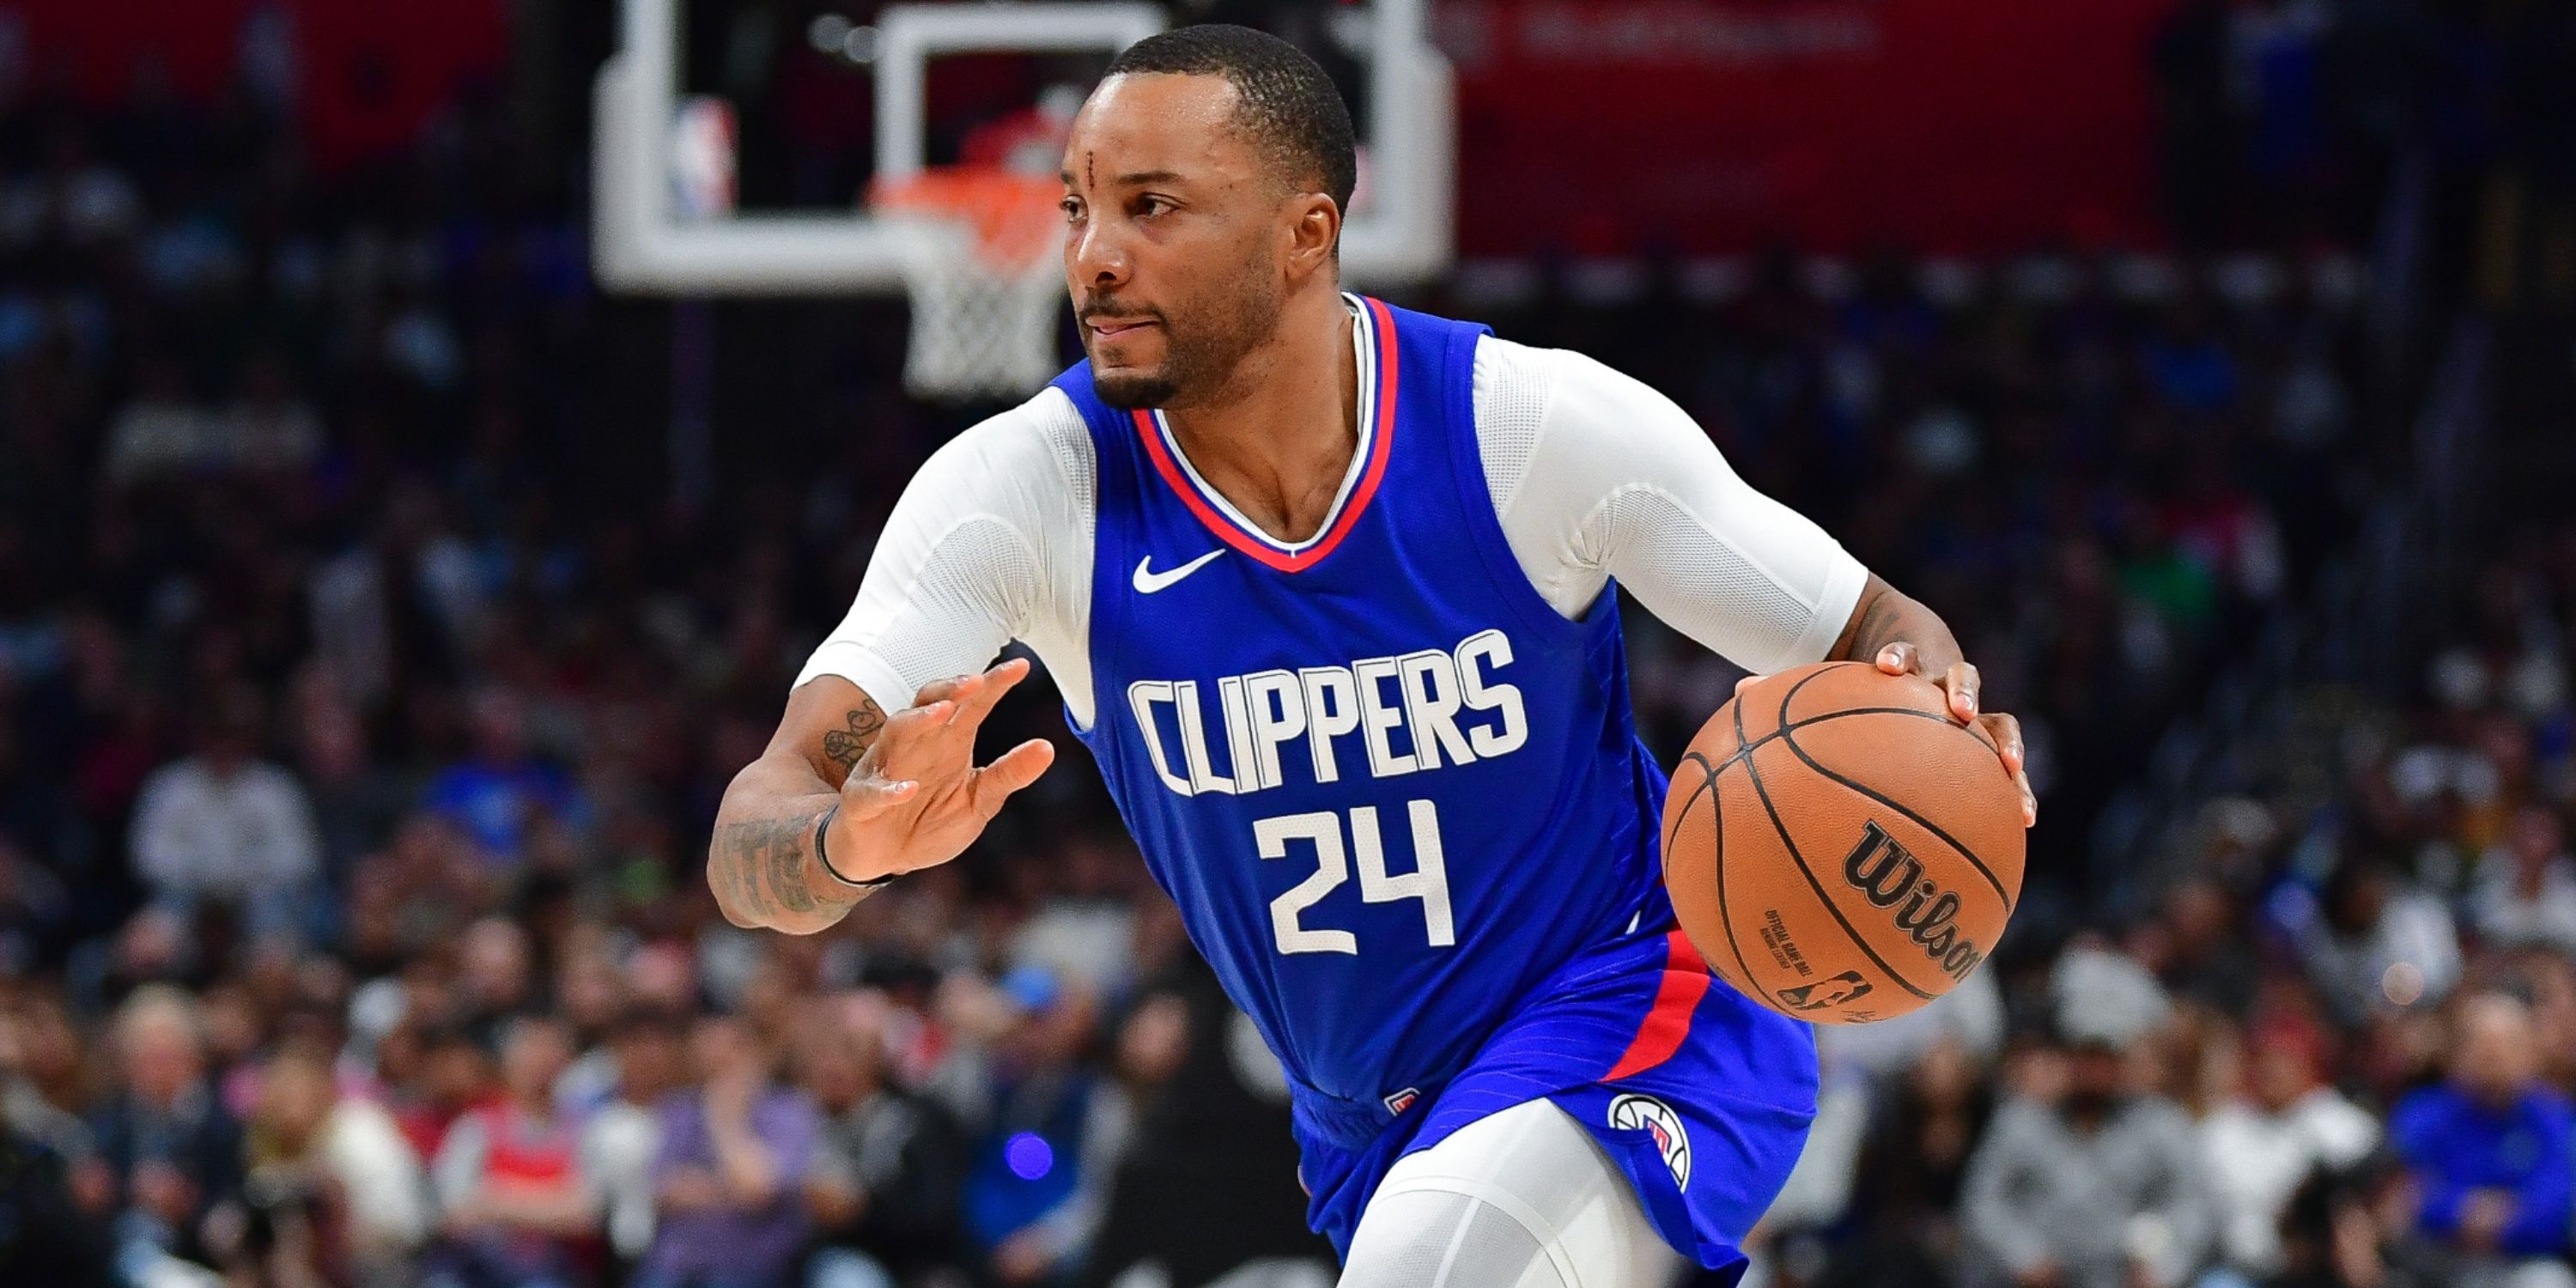 Norman Powell Los Angeles Clippers